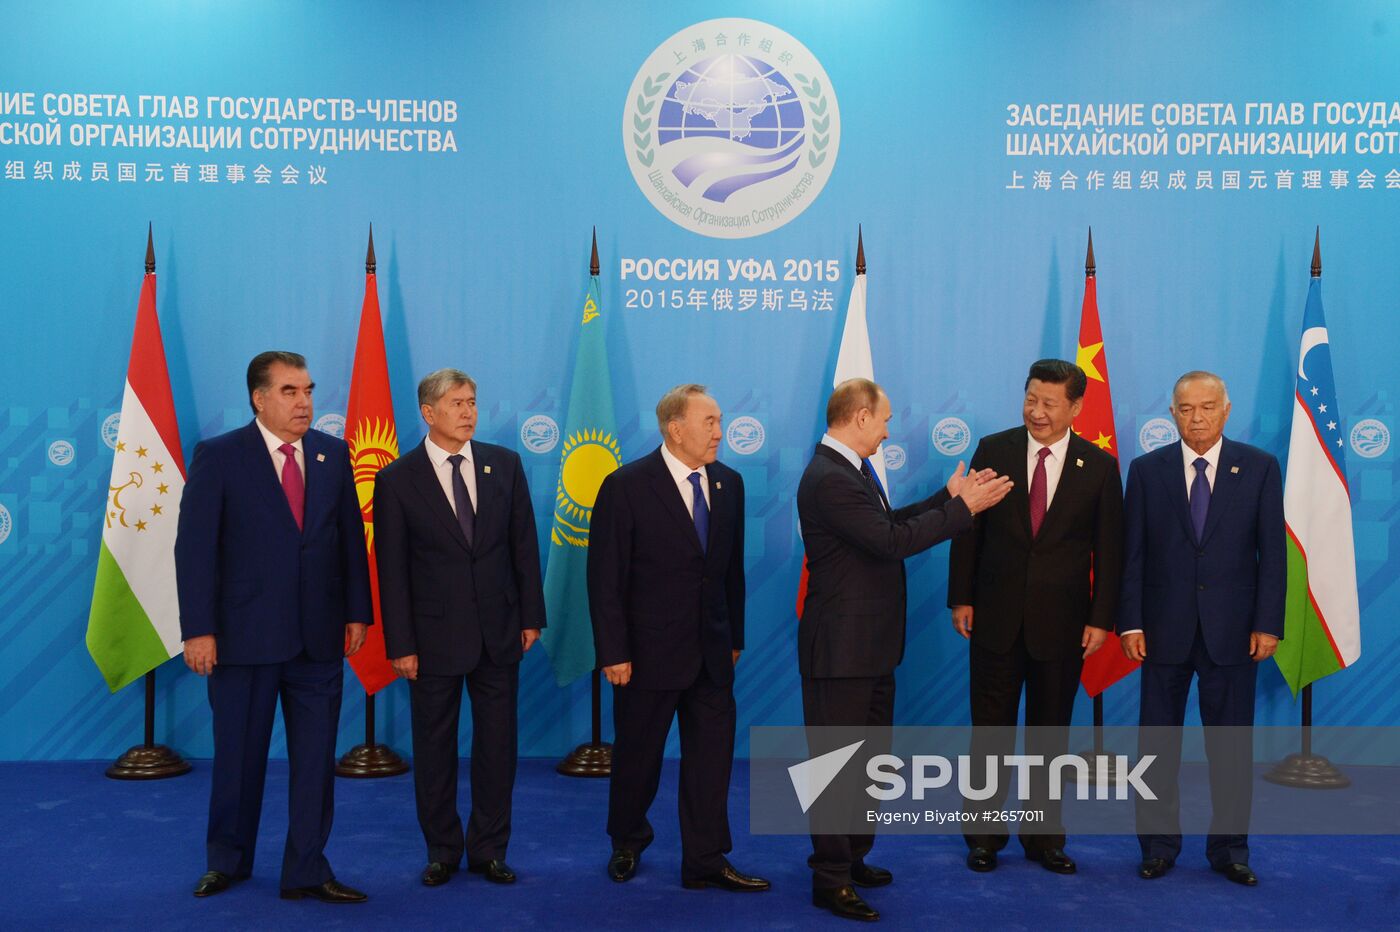 Group photograph of SCO heads of state